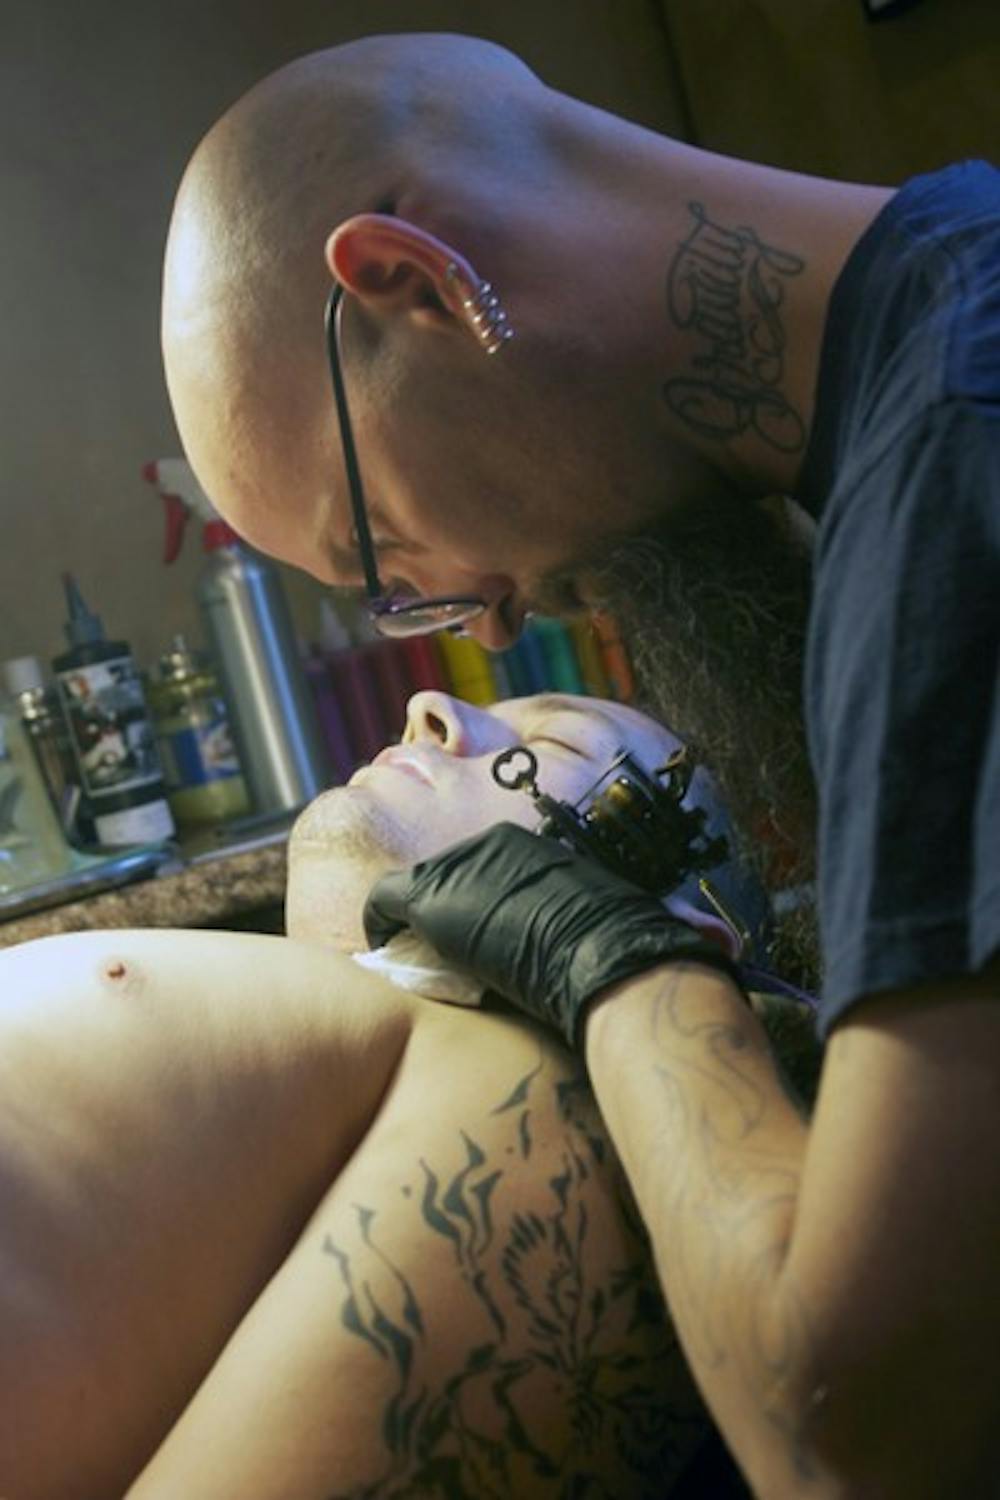 FREE SPEECH ART: Nathan Rios gets a tattoo done across his chest by Living Canvas Tattoo artist, Chris Parrish. The issue of whether tattoos are protected under the First Amendment right of freedom of speech has long been debated by Constitutional experts. (Photo by Shawn Raymundo)